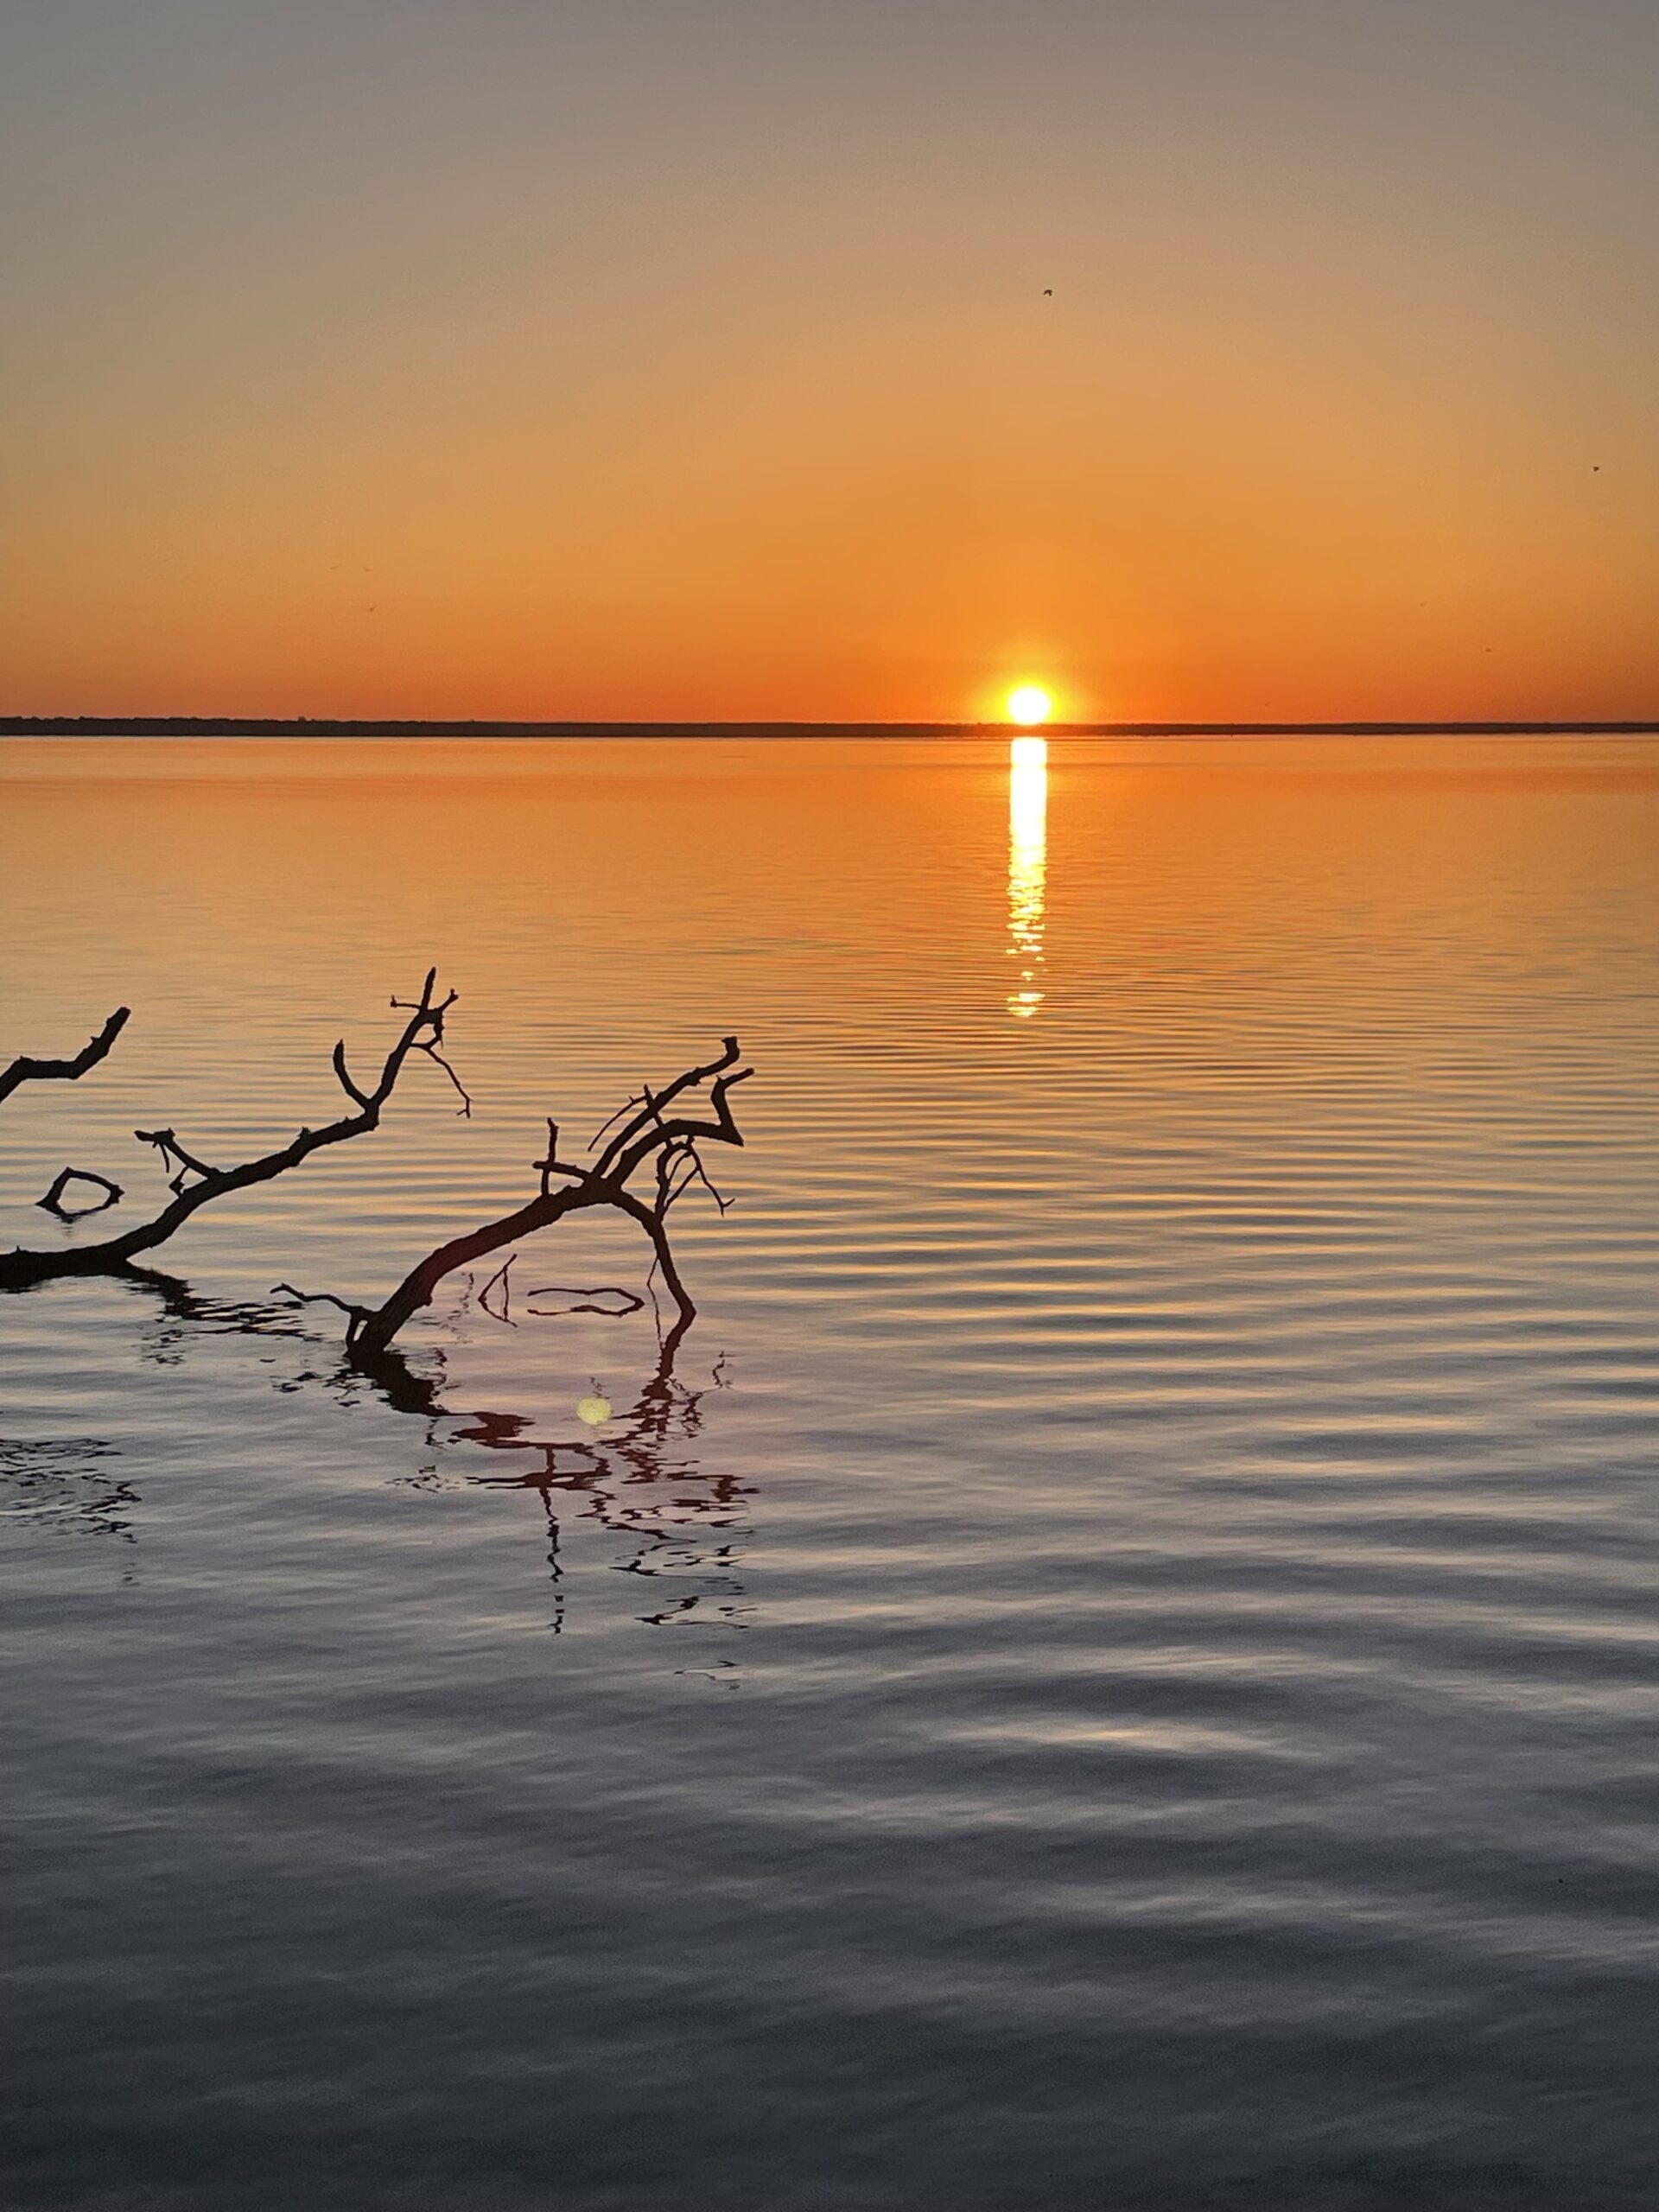 A bright yellow half circle of a sun rests on the horizon and casts bright yellow line into the water. A thin strip of land separates the sky from the water. Both are bright orange differing only by a slight ripple on the water. Nearby two limbs from a dead bush extend above the water.